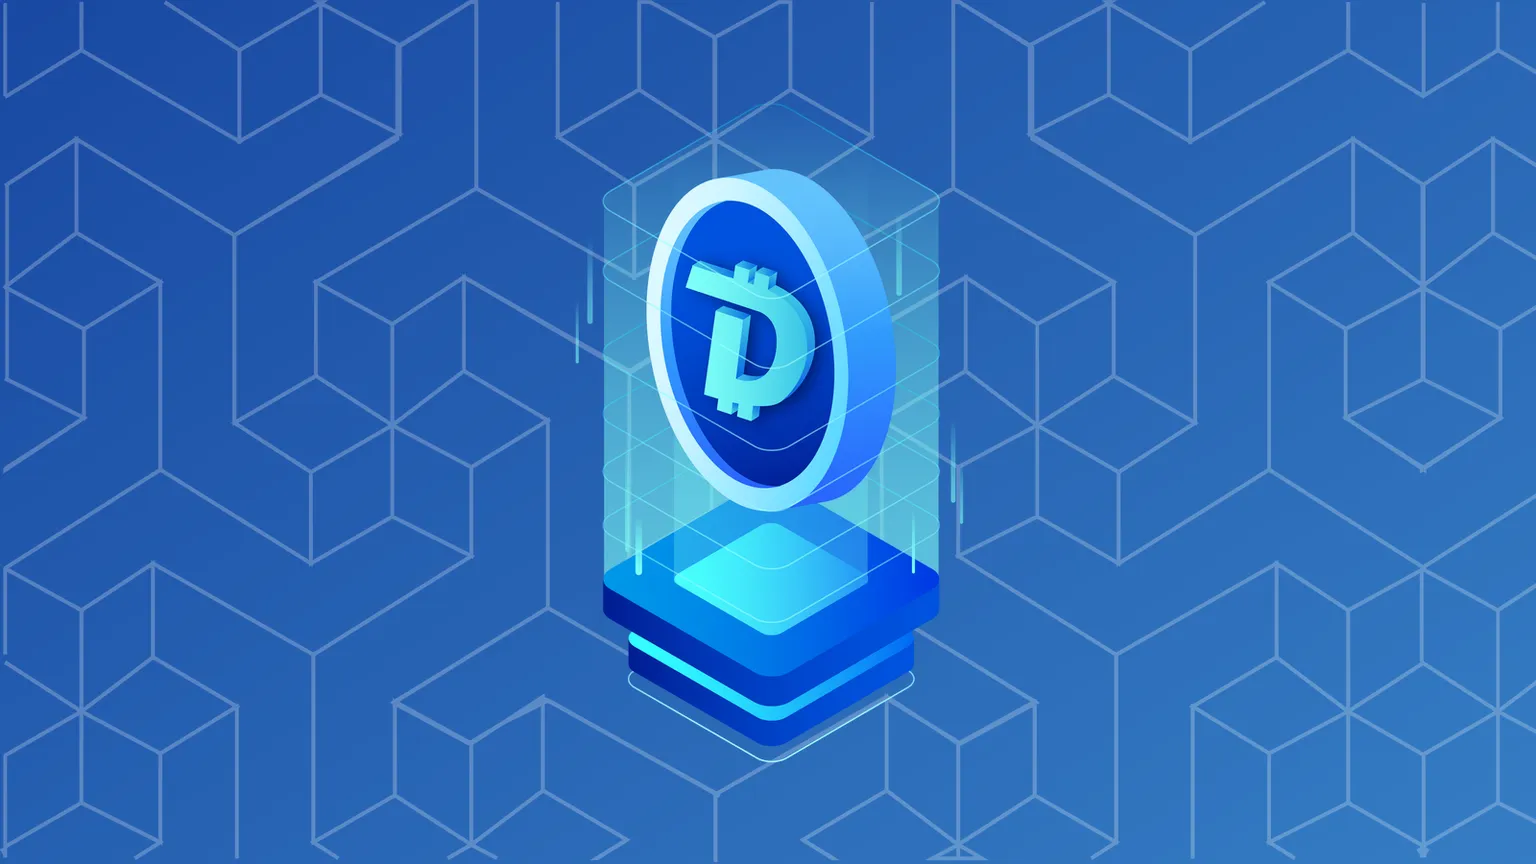 Learn about Digibyte in three minutes.